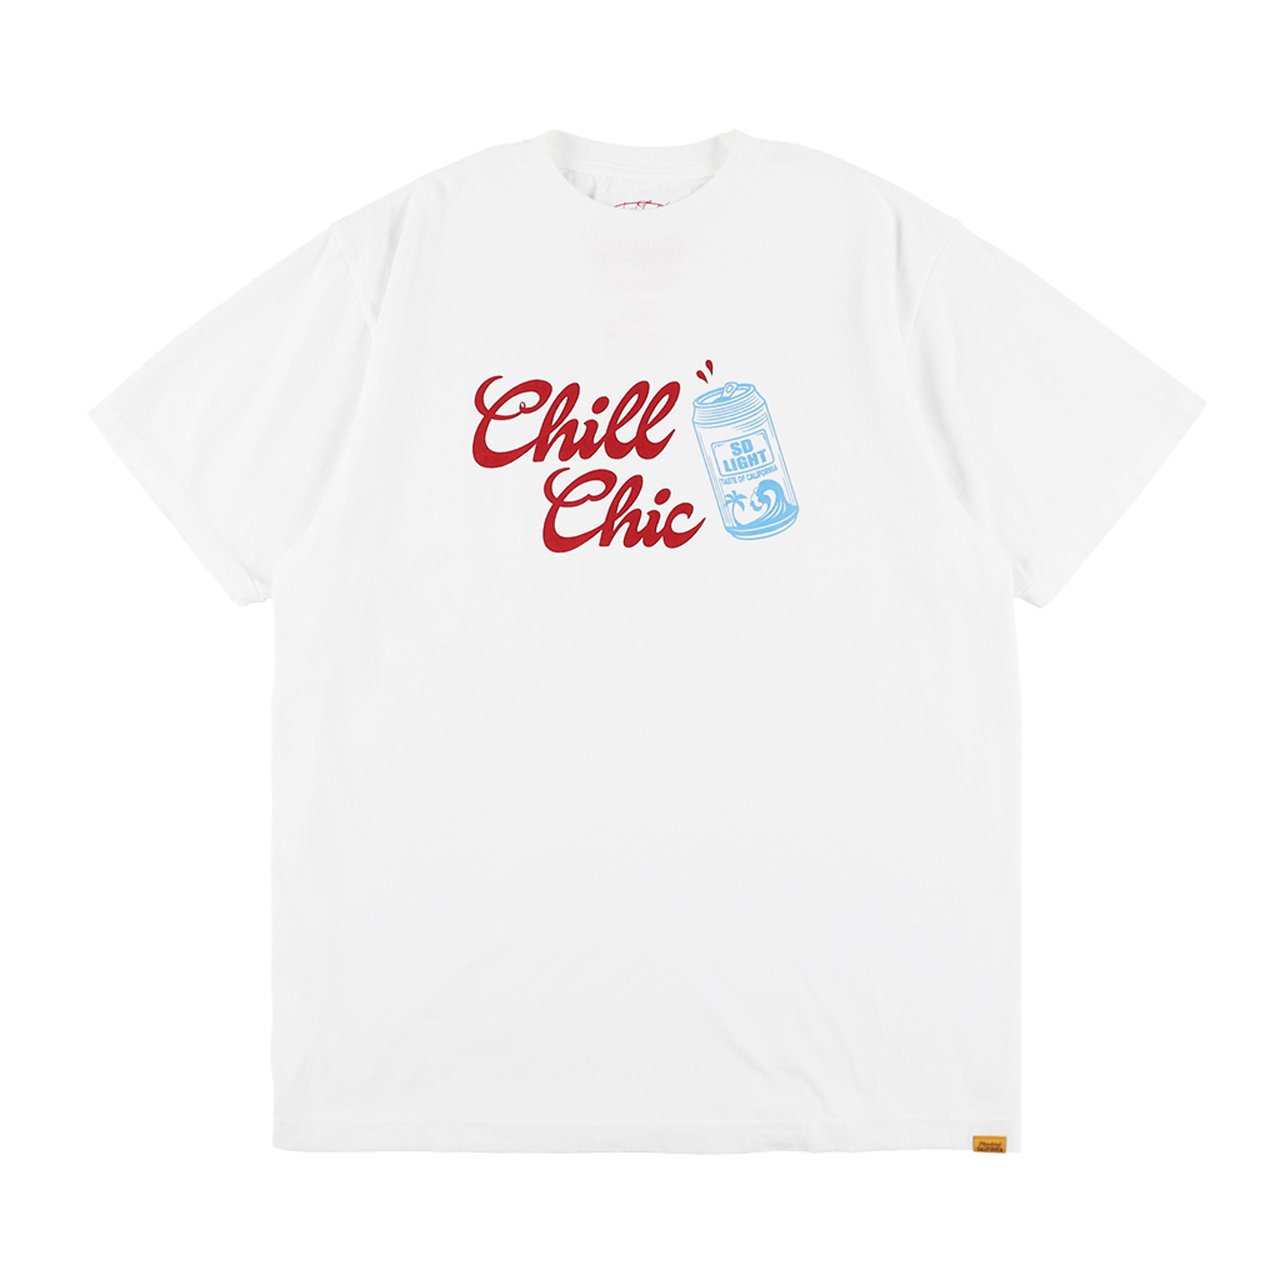 <img class='new_mark_img1' src='https://img.shop-pro.jp/img/new/icons5.gif' style='border:none;display:inline;margin:0px;padding:0px;width:auto;' />STANDARD CALIFORNIA ( ե˥)Chill Chic Tee White